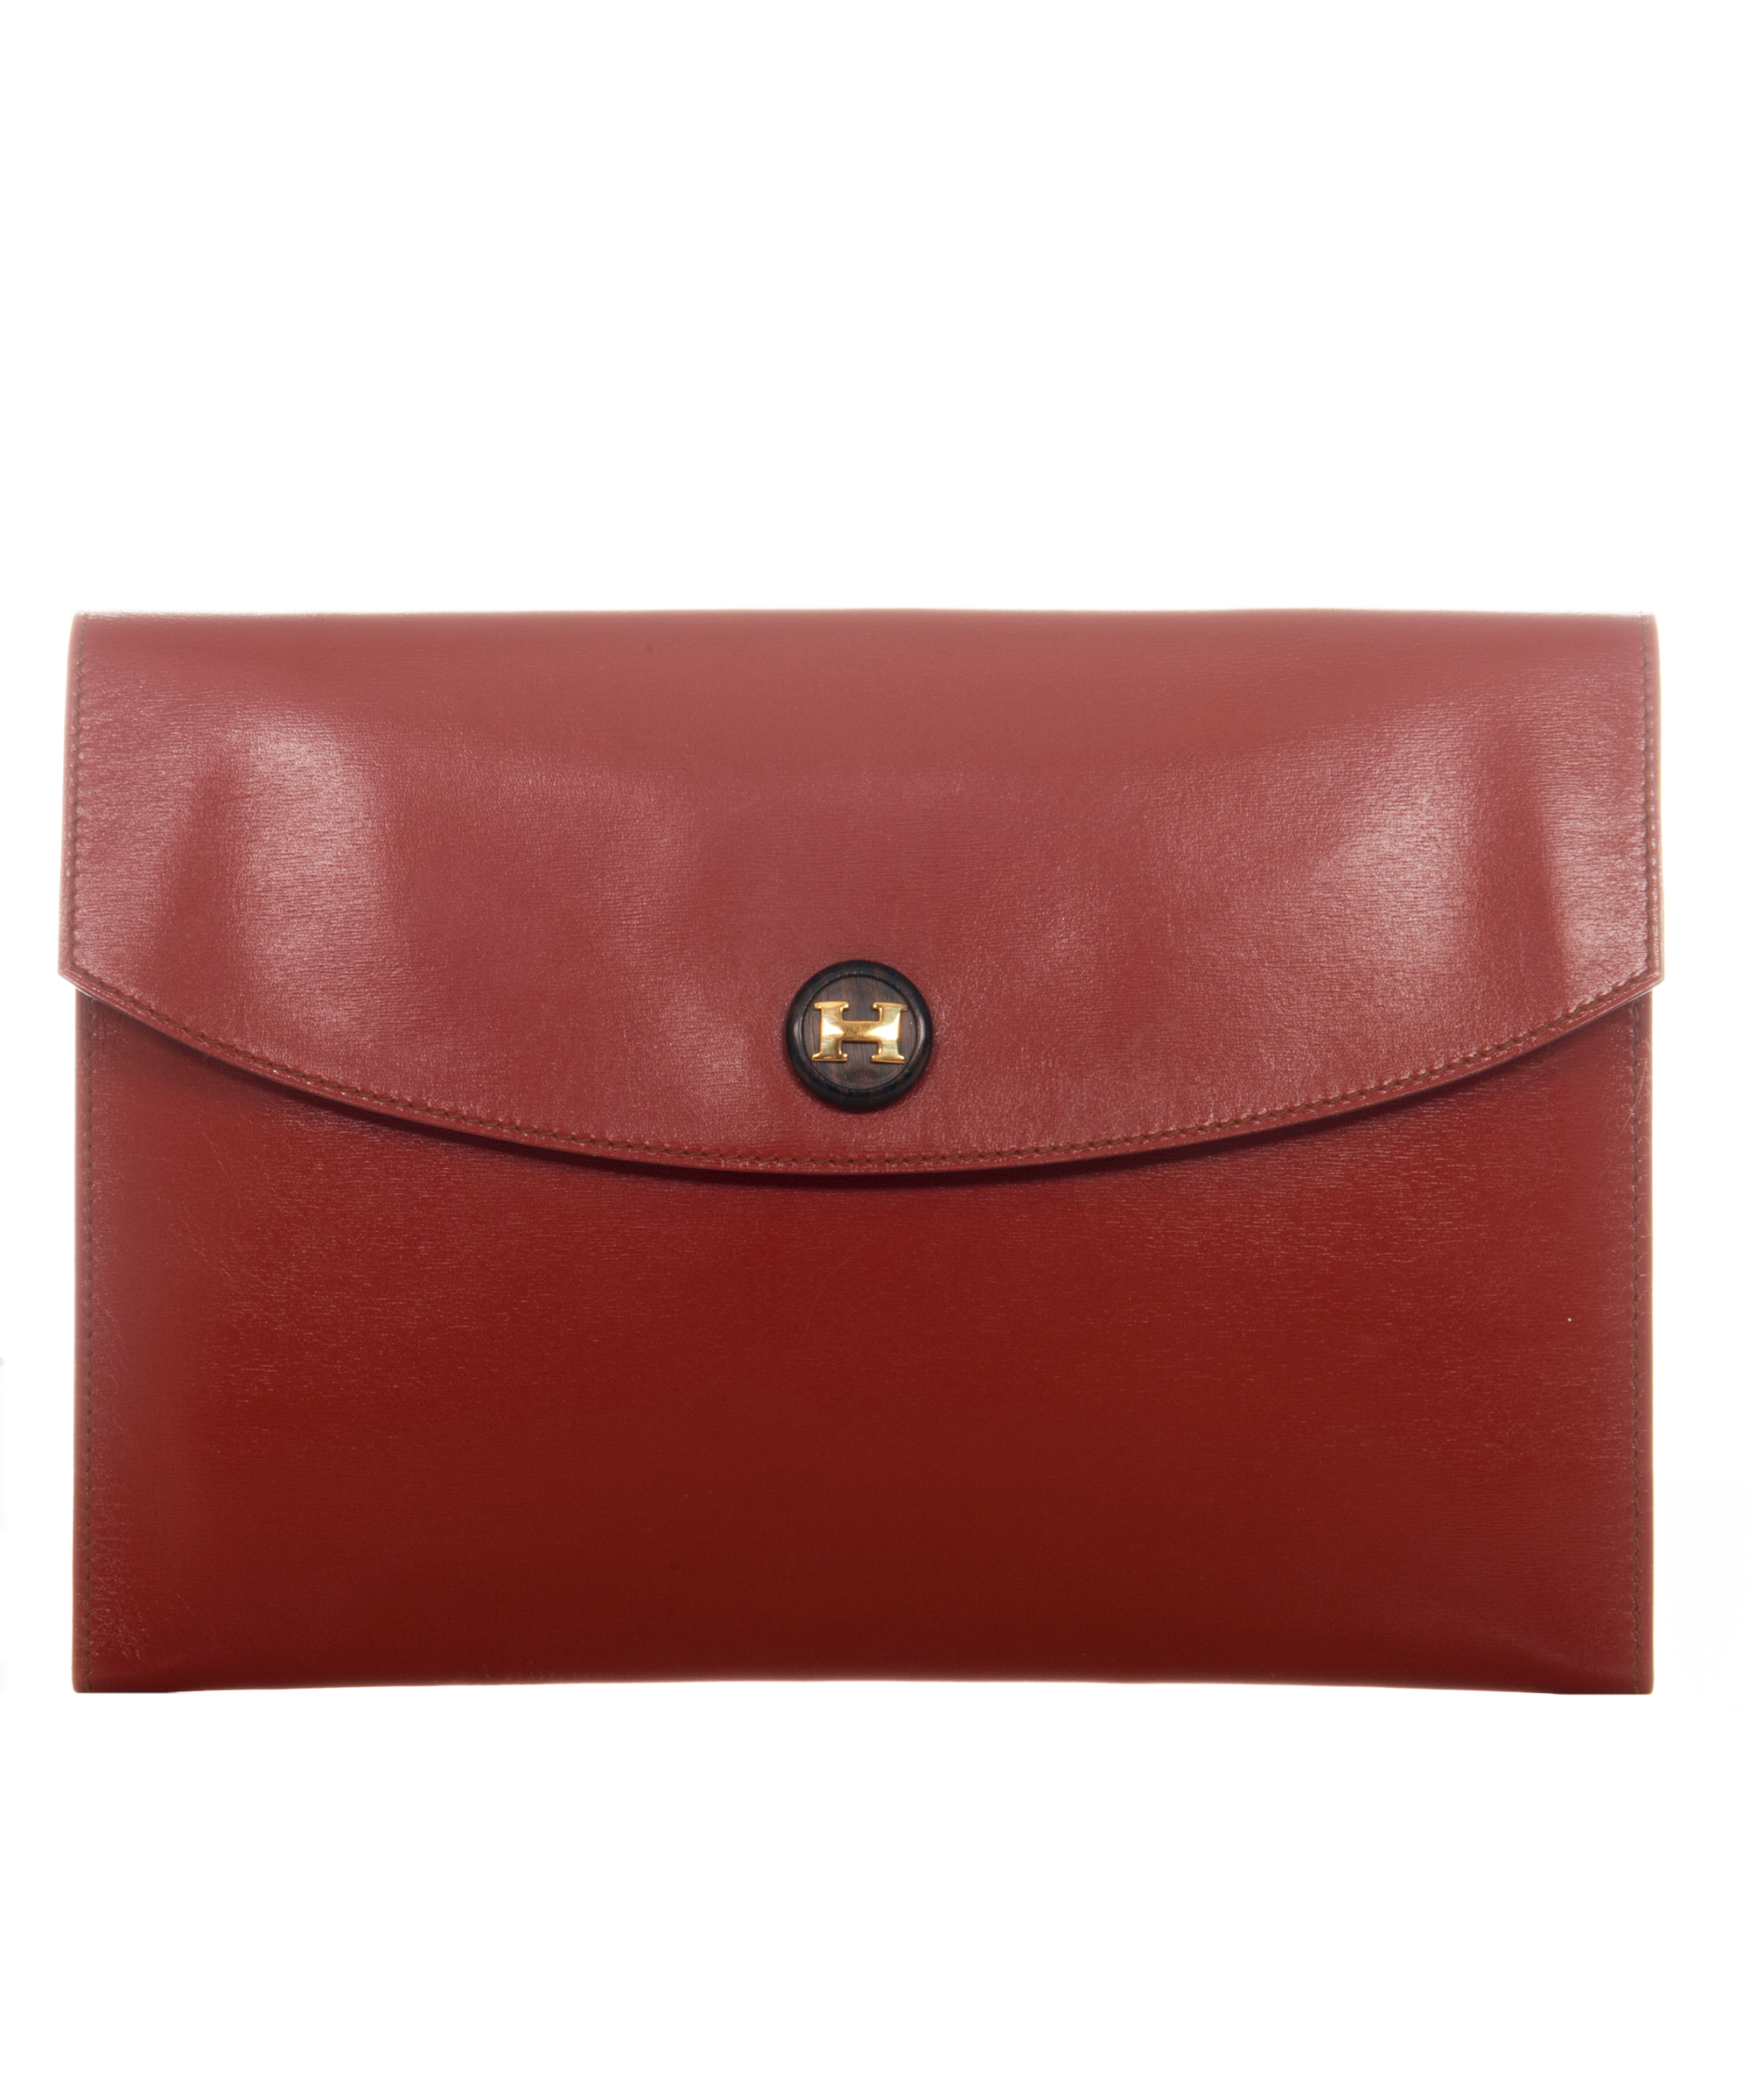 Lot - HERMES BROWN LEATHER RIO CLUTCH